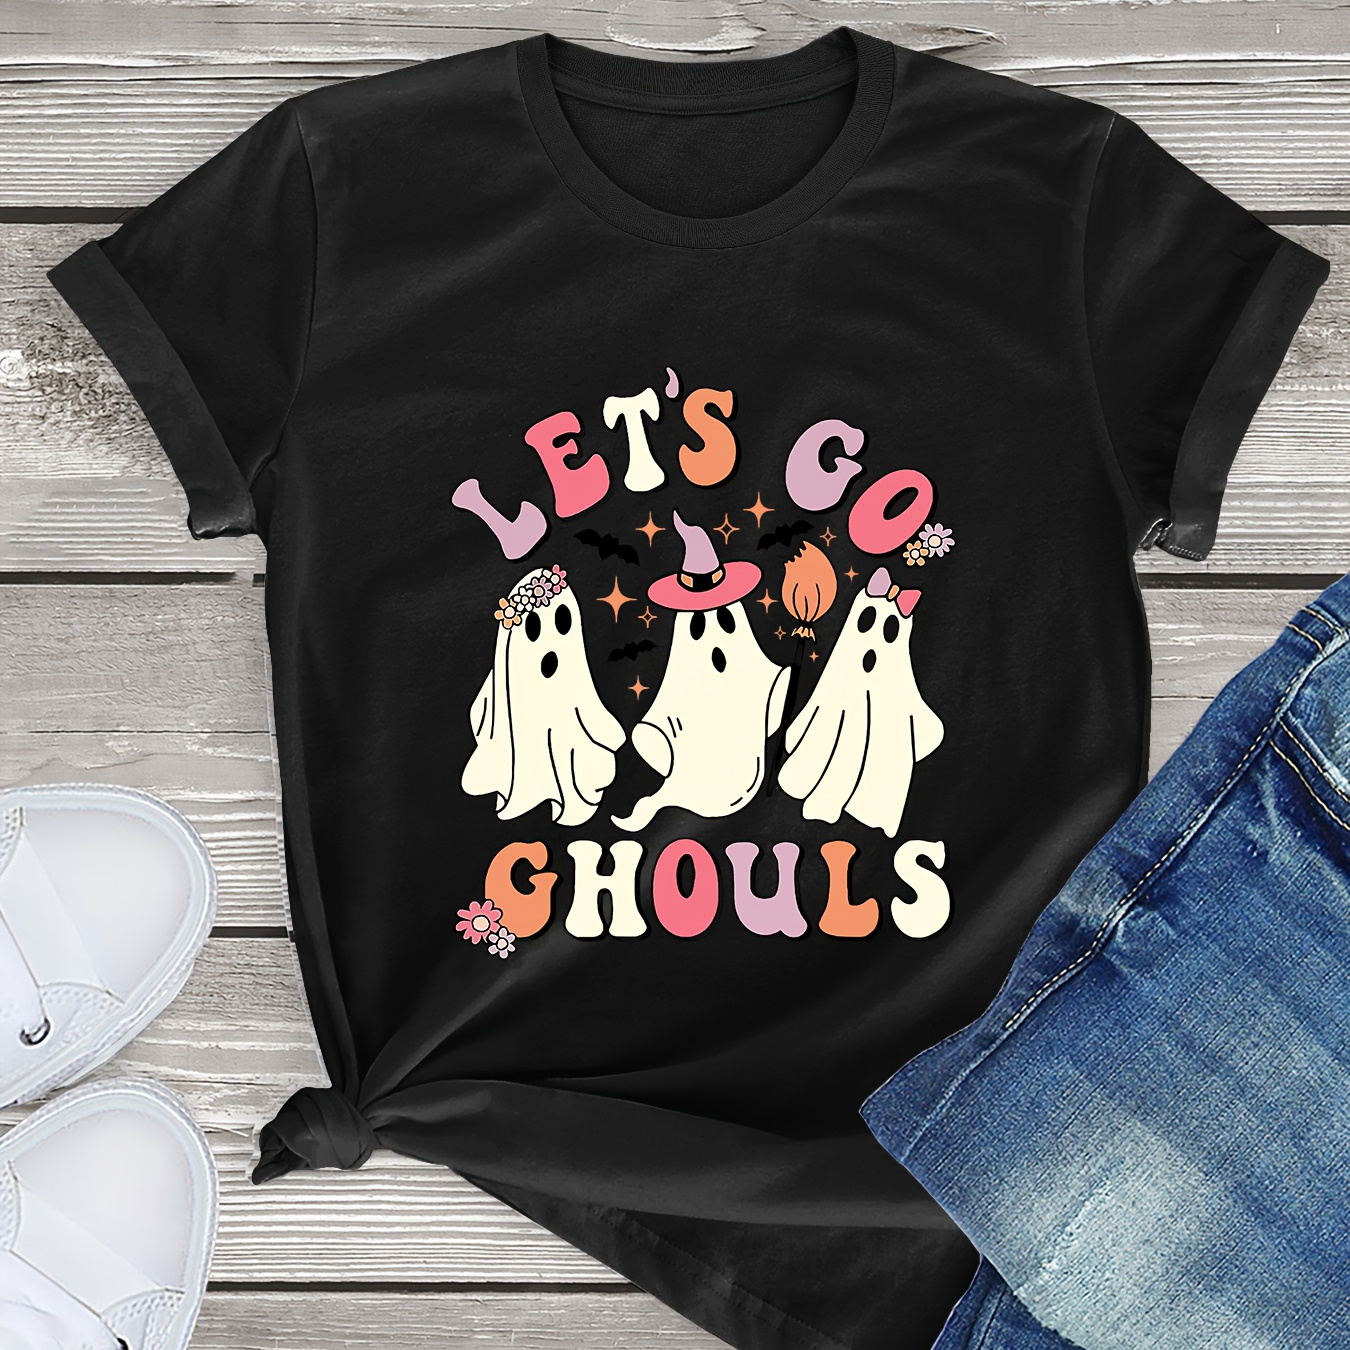 

Let's Go Ghouls & Ghost Outfit Print T-shirt, Casual Short Sleeve Top For Spring & Summer, Women's Clothing